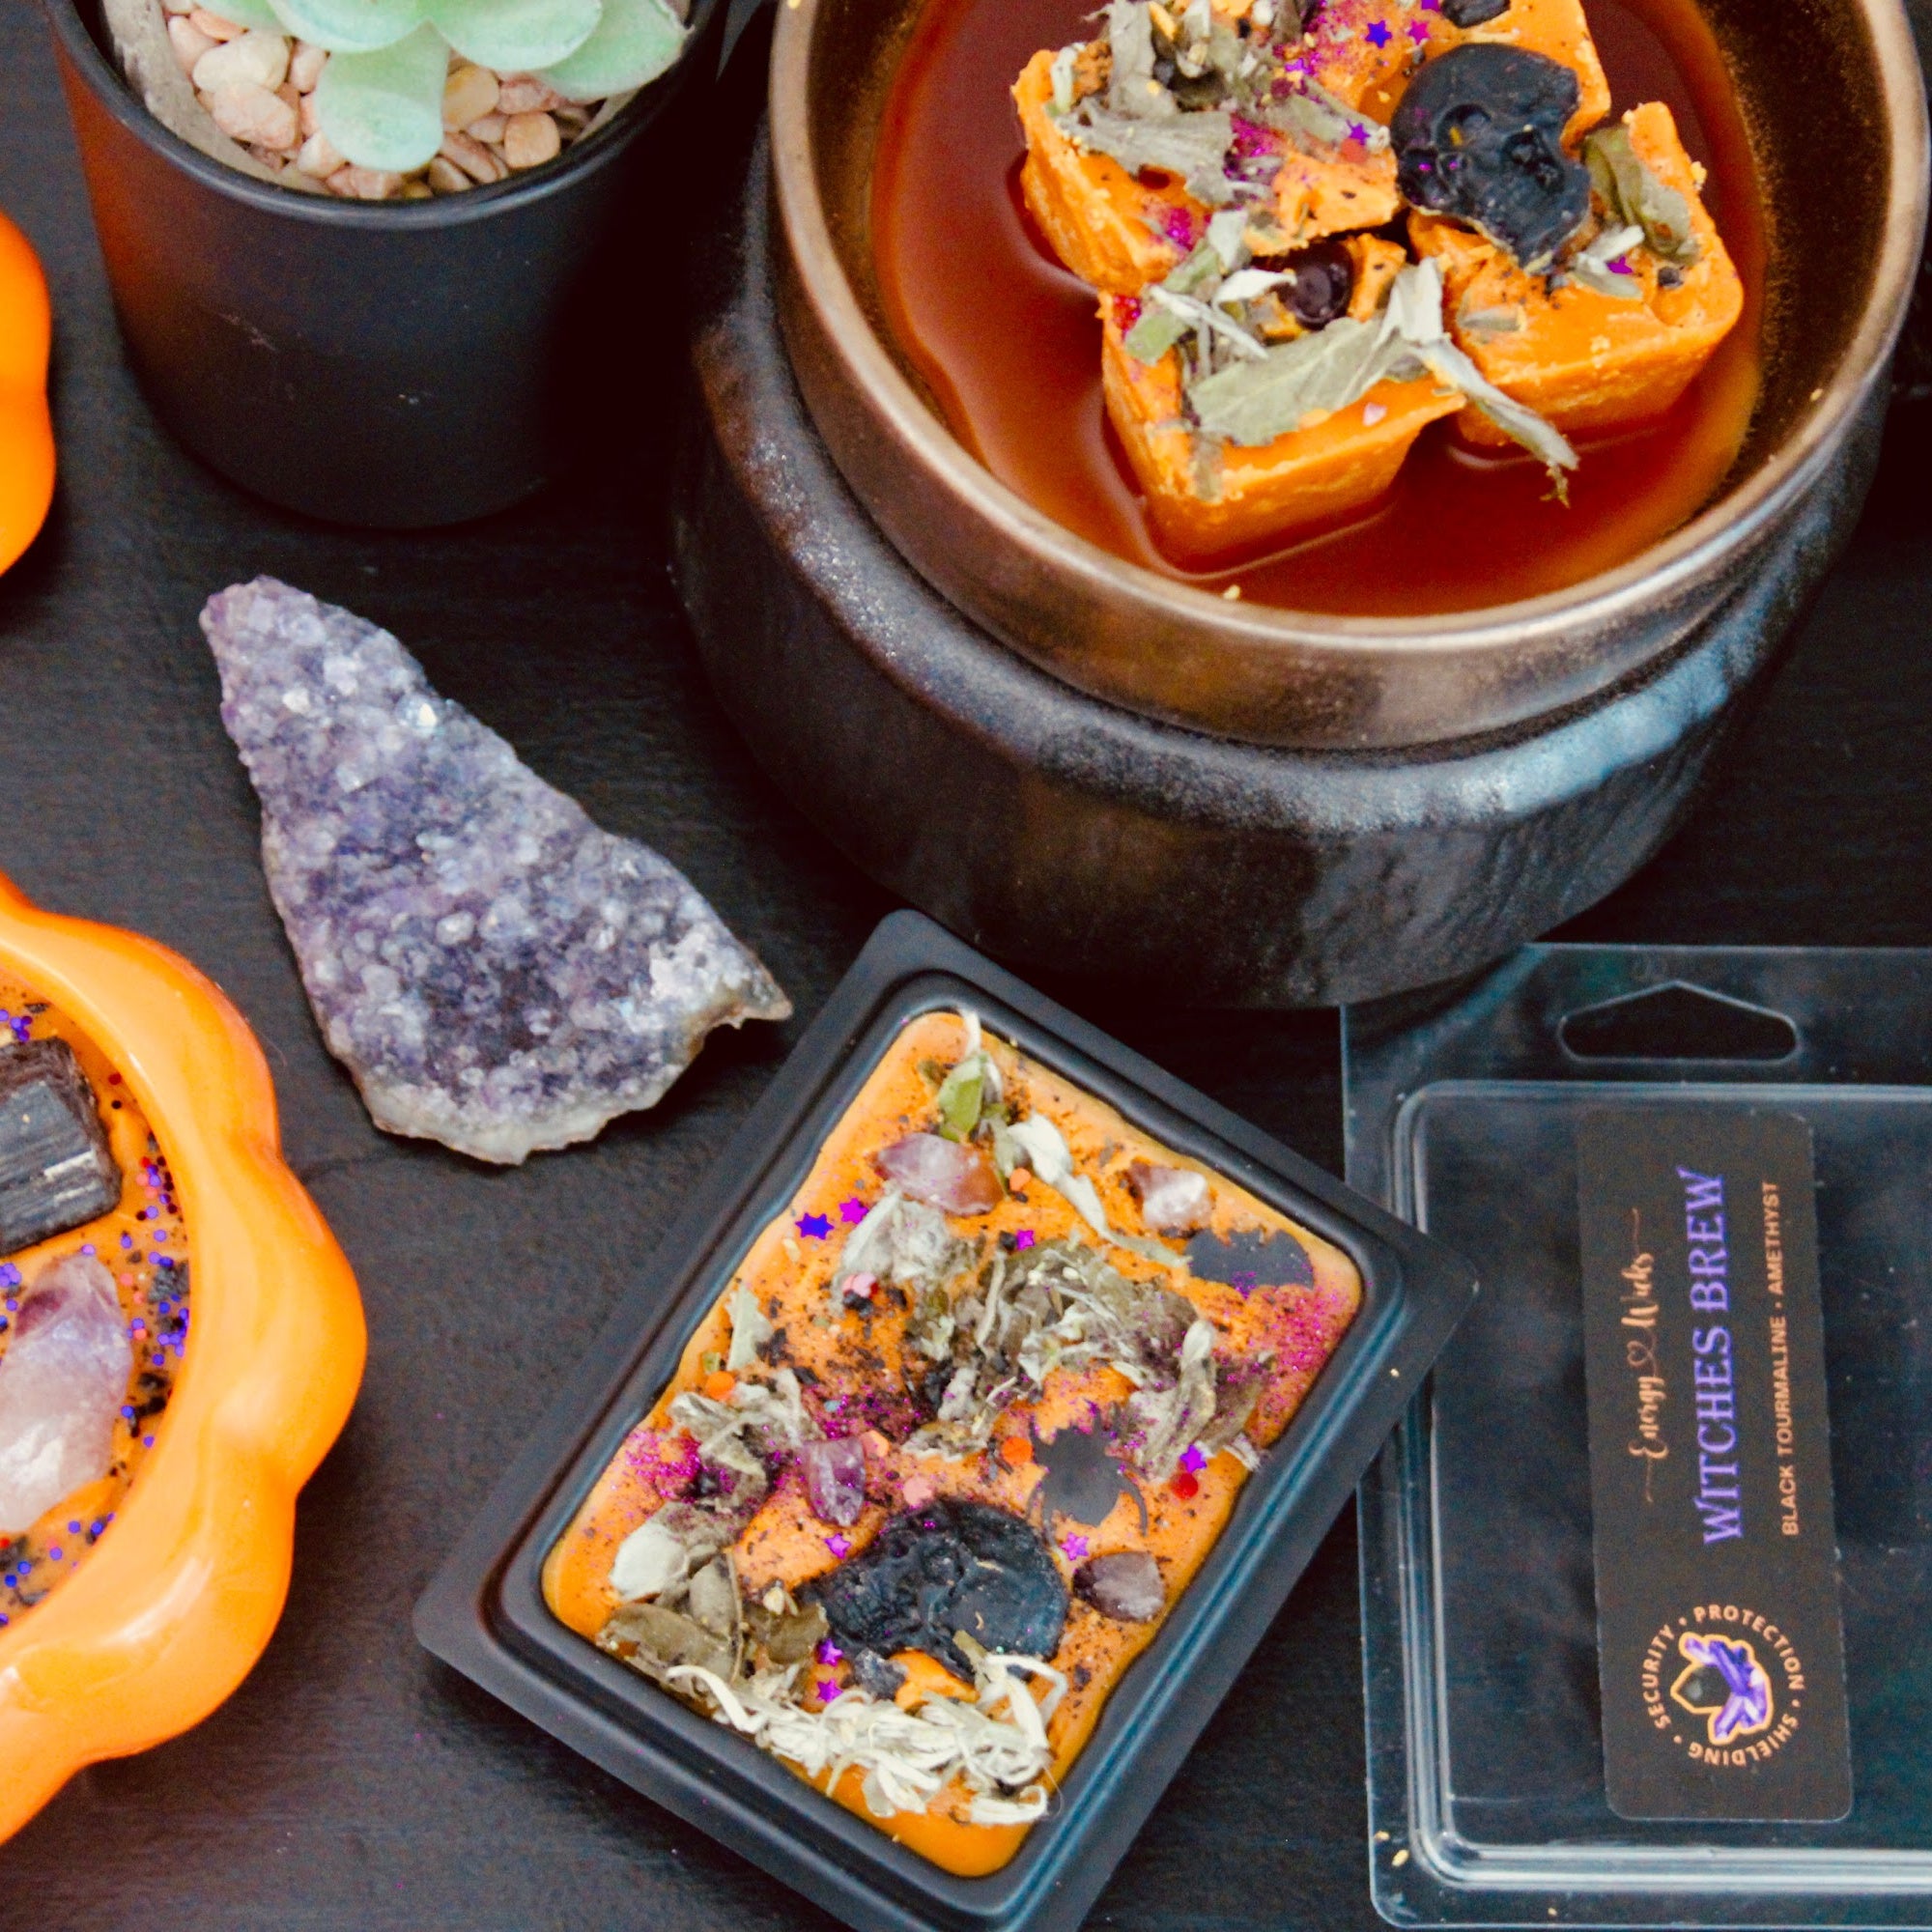 Witches Brew Wax Melts